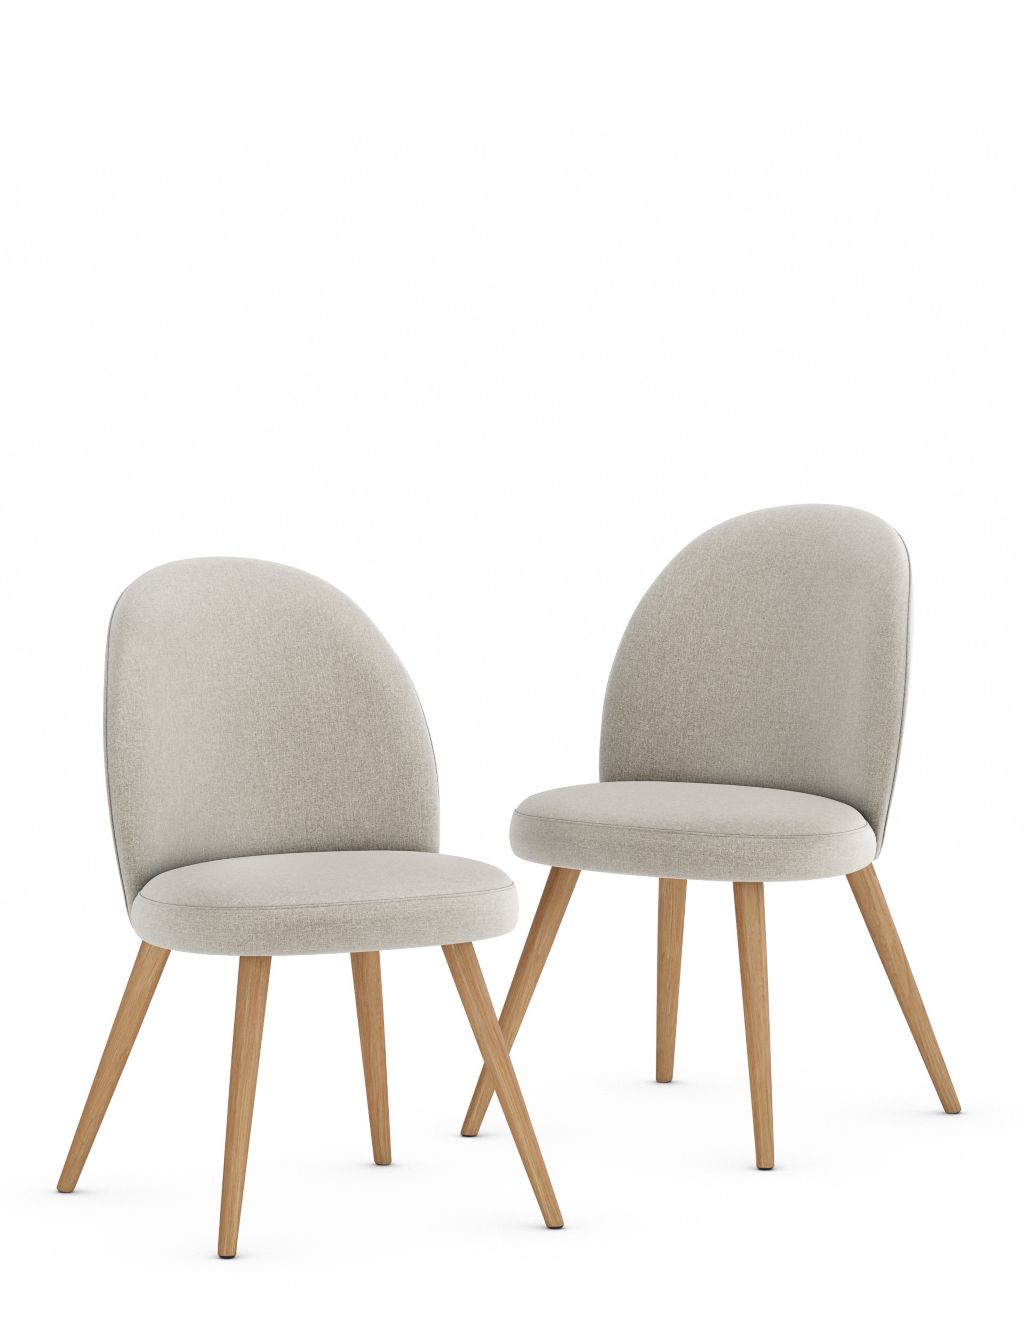 Set of 2 Nord Dining Chairs image 2